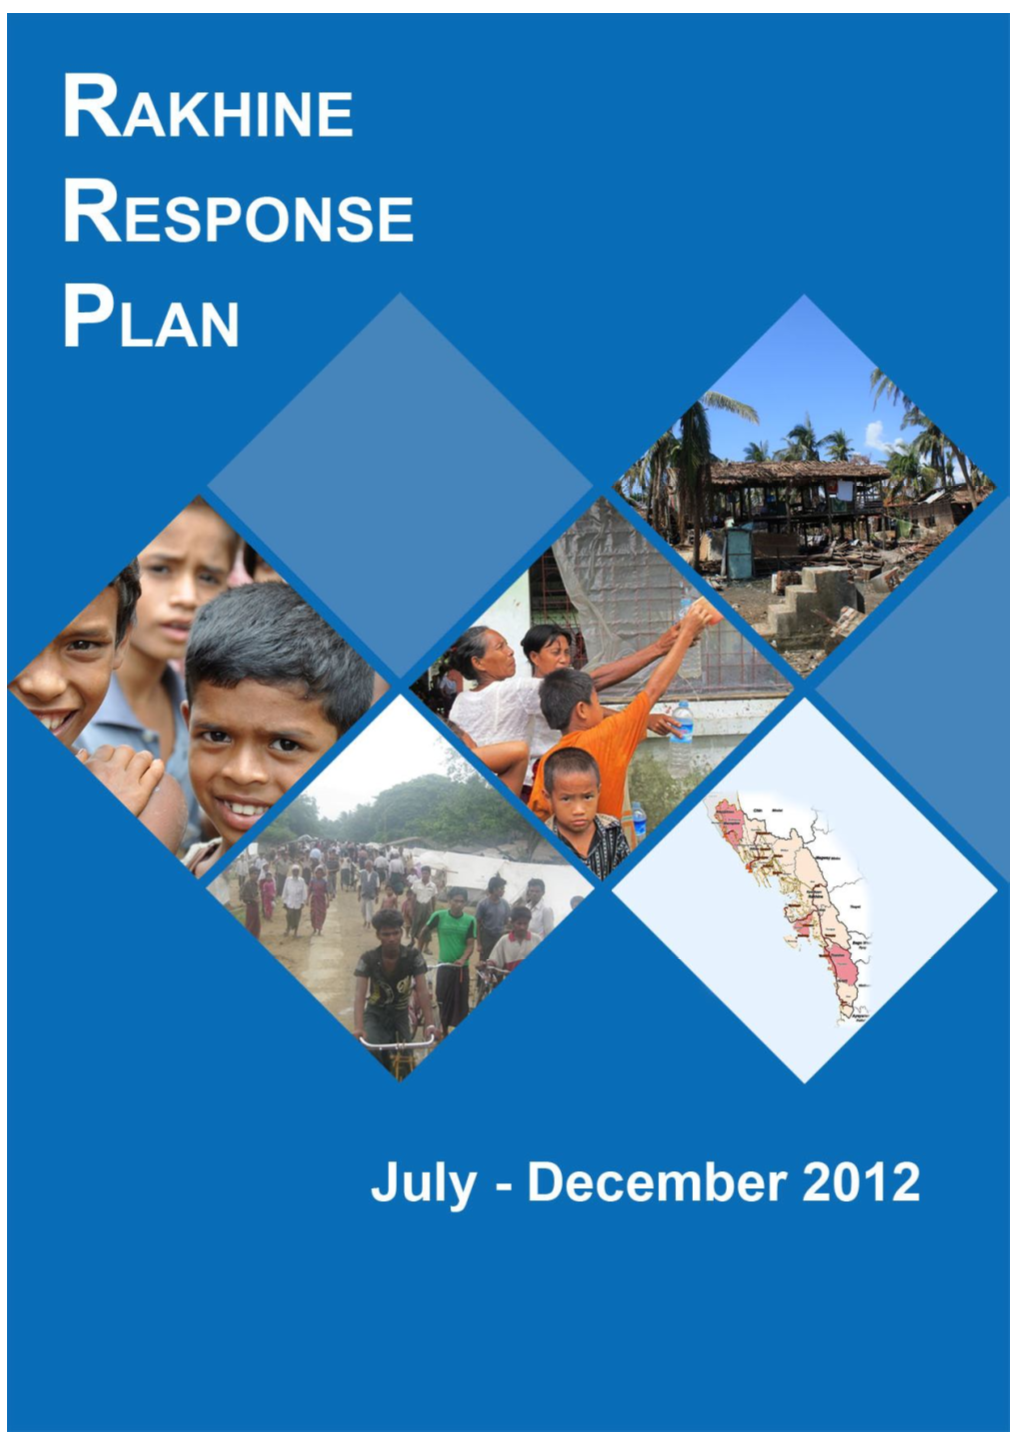 Rakhine Response Plan Is a Document Agreed by All Humanitarian Partners with Operations in Rakhine State 2